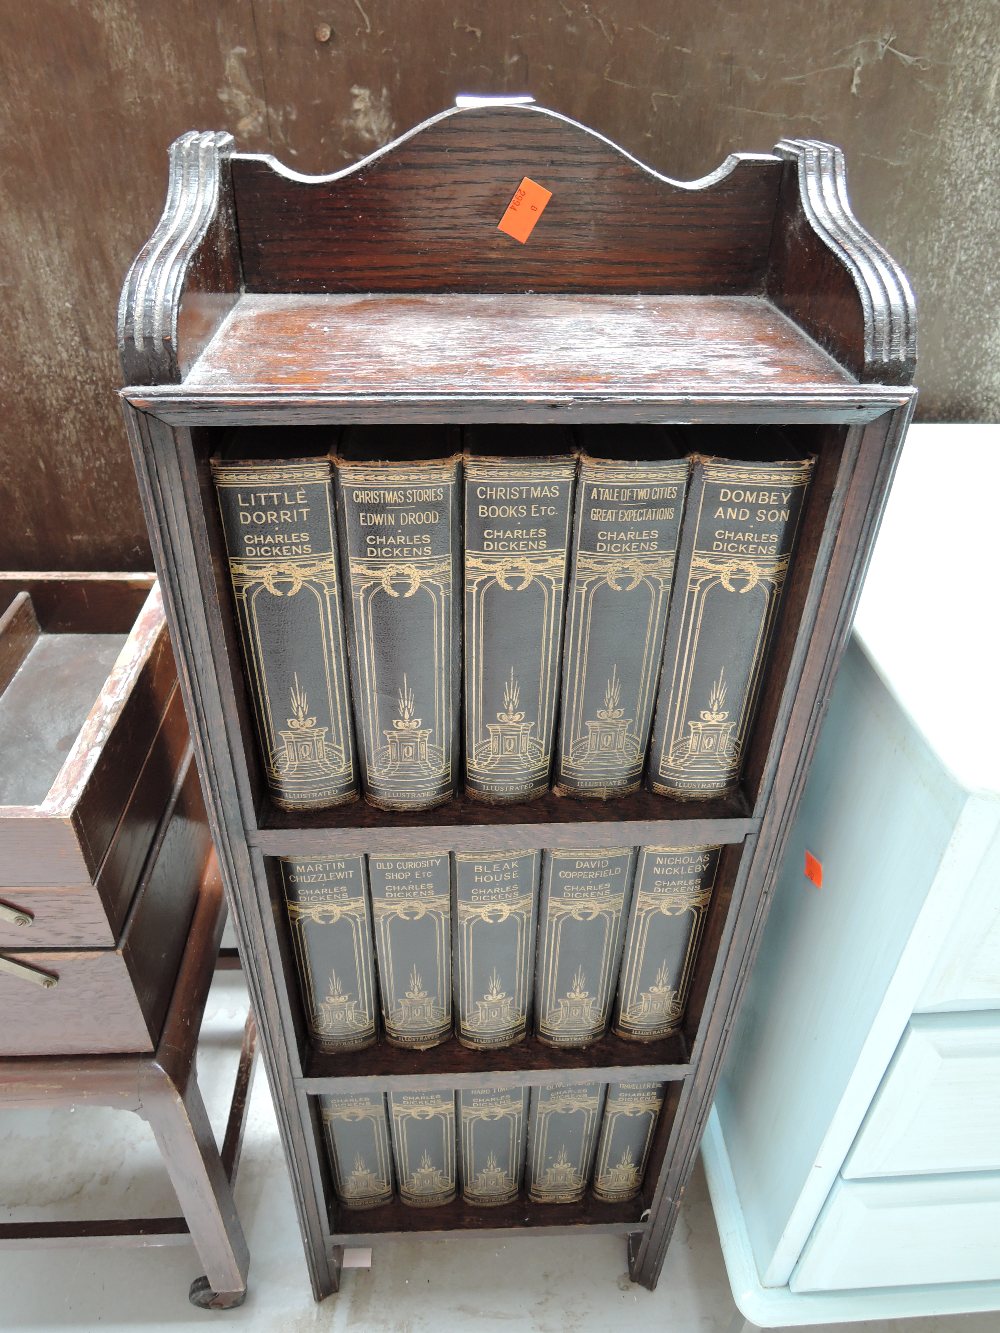 A small dark oak bookshelf with Charles Dickens volumes included